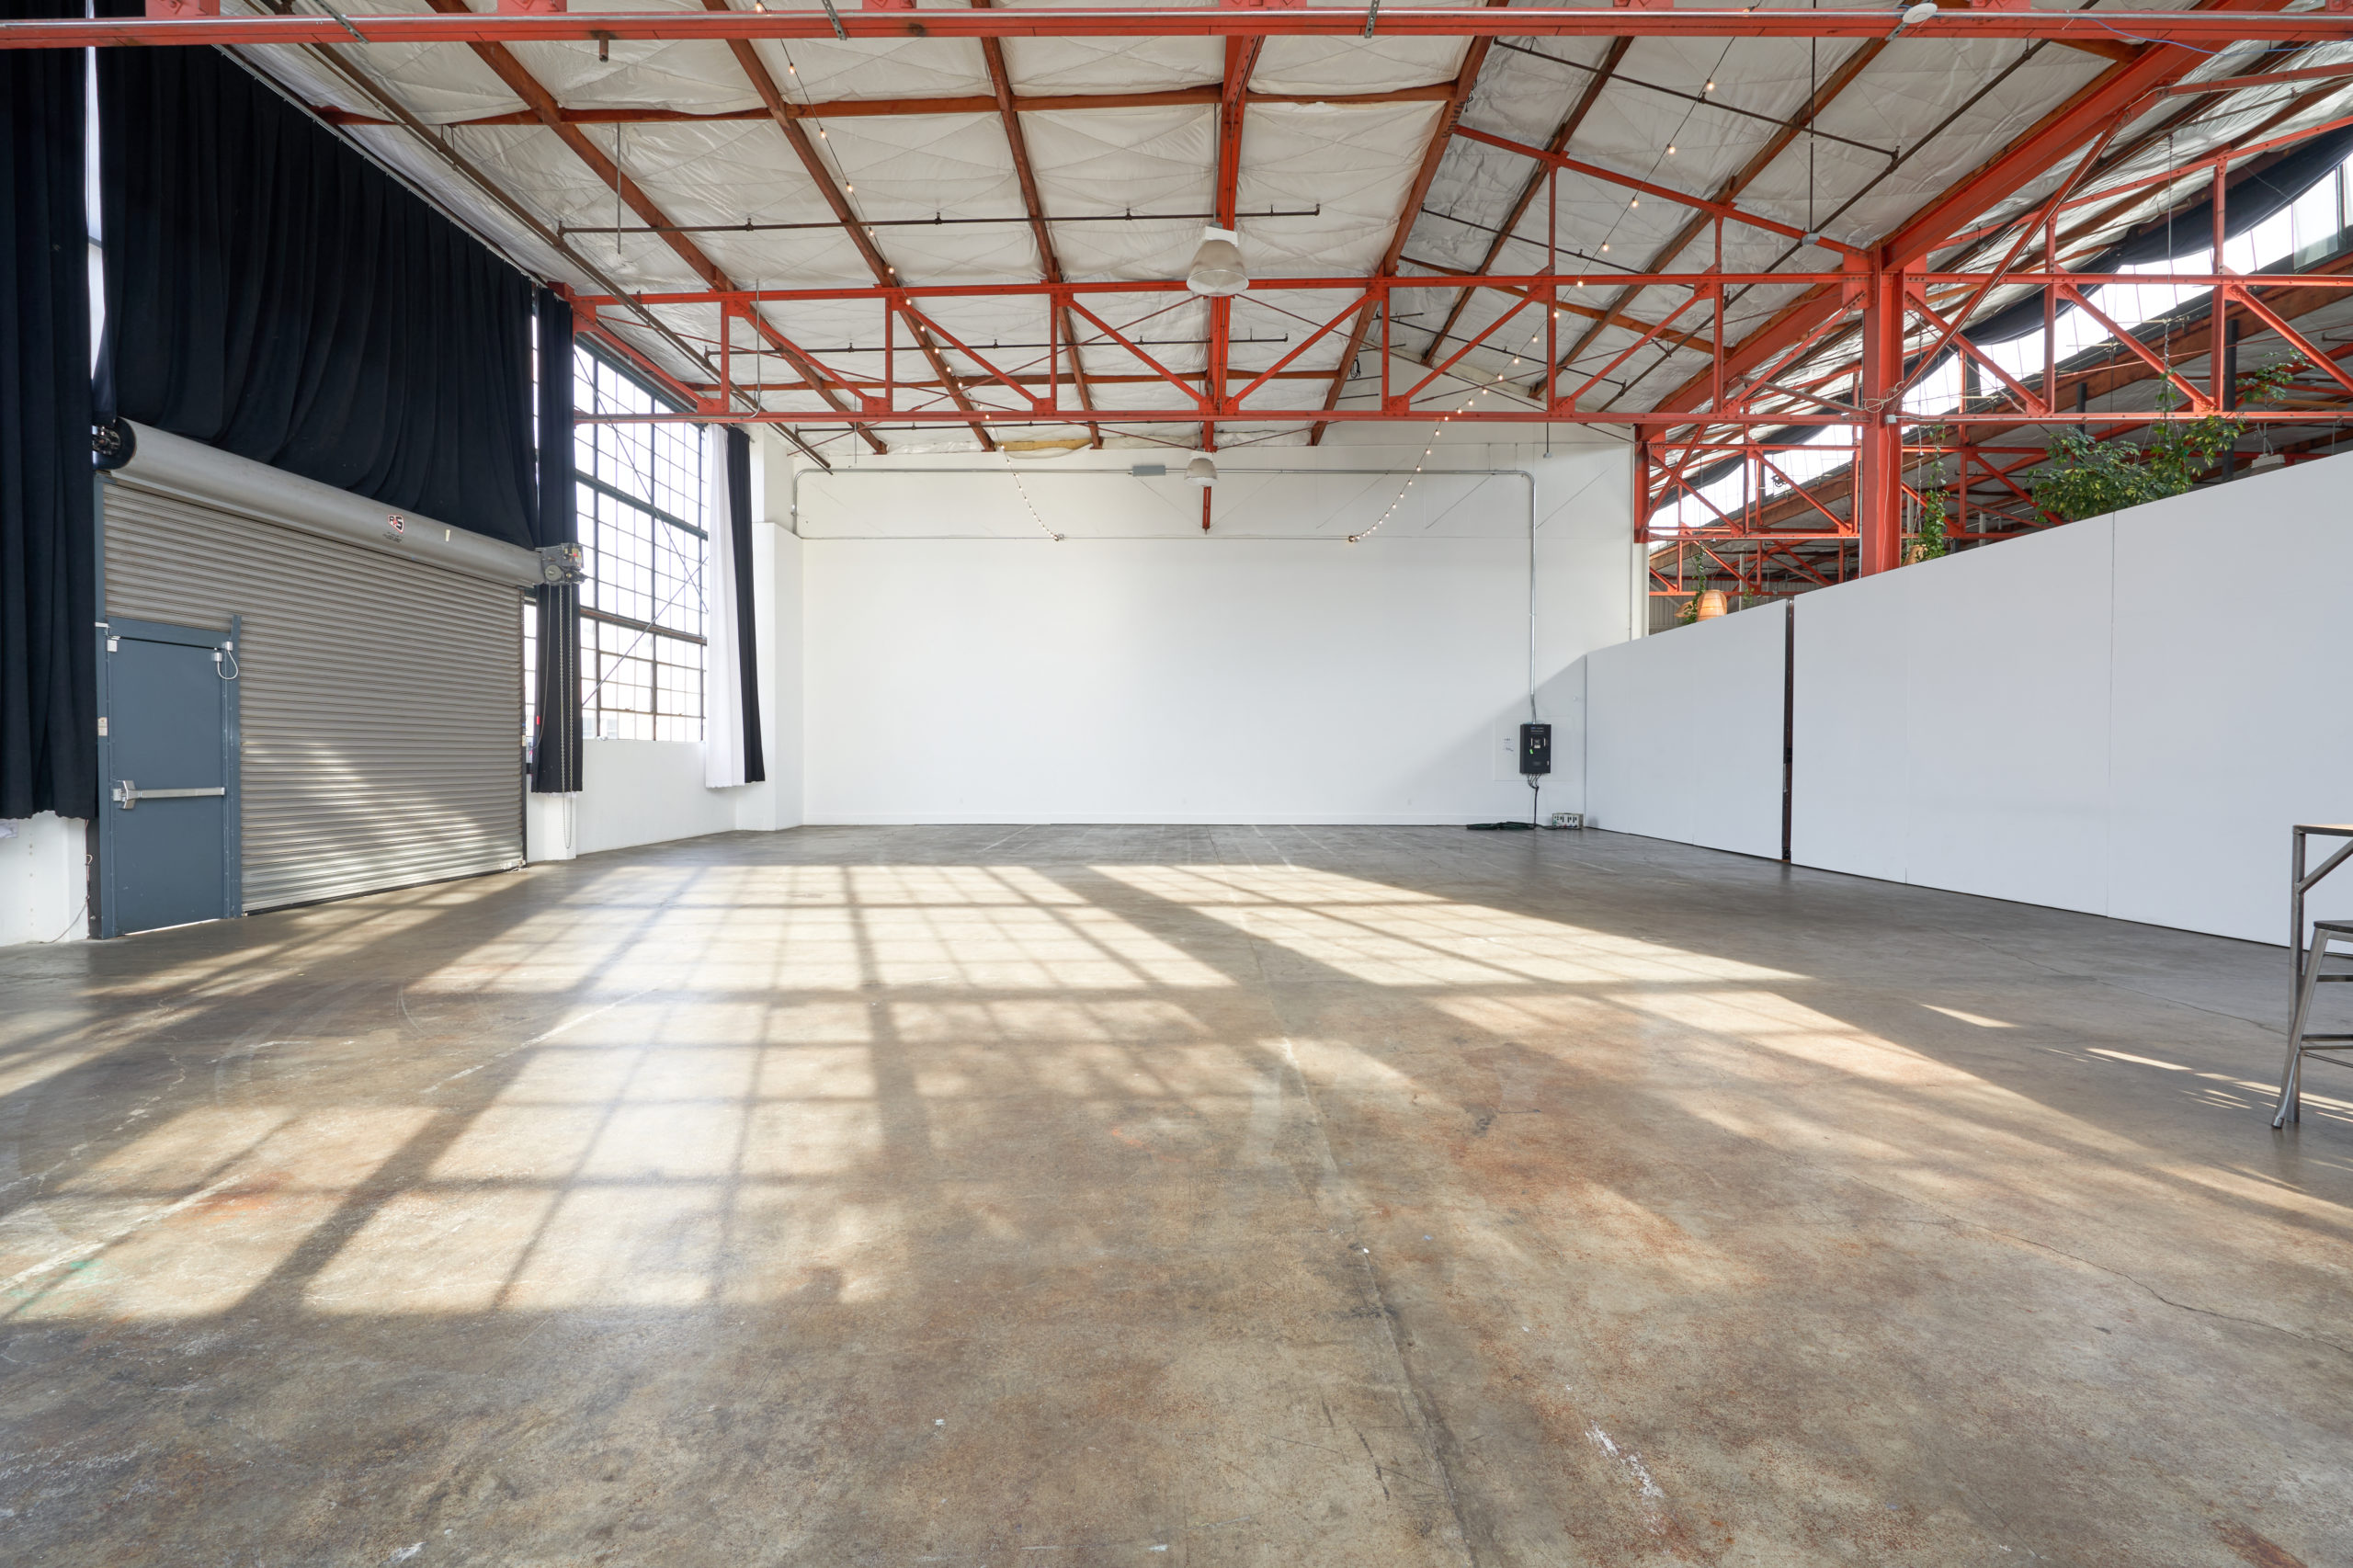 View of the large white wall and the orange industrial beams on the ceiling of expansive Studio 5. There is also a closed loading dock door on the left of the best multiple set studio rental Berkeley has to offer.